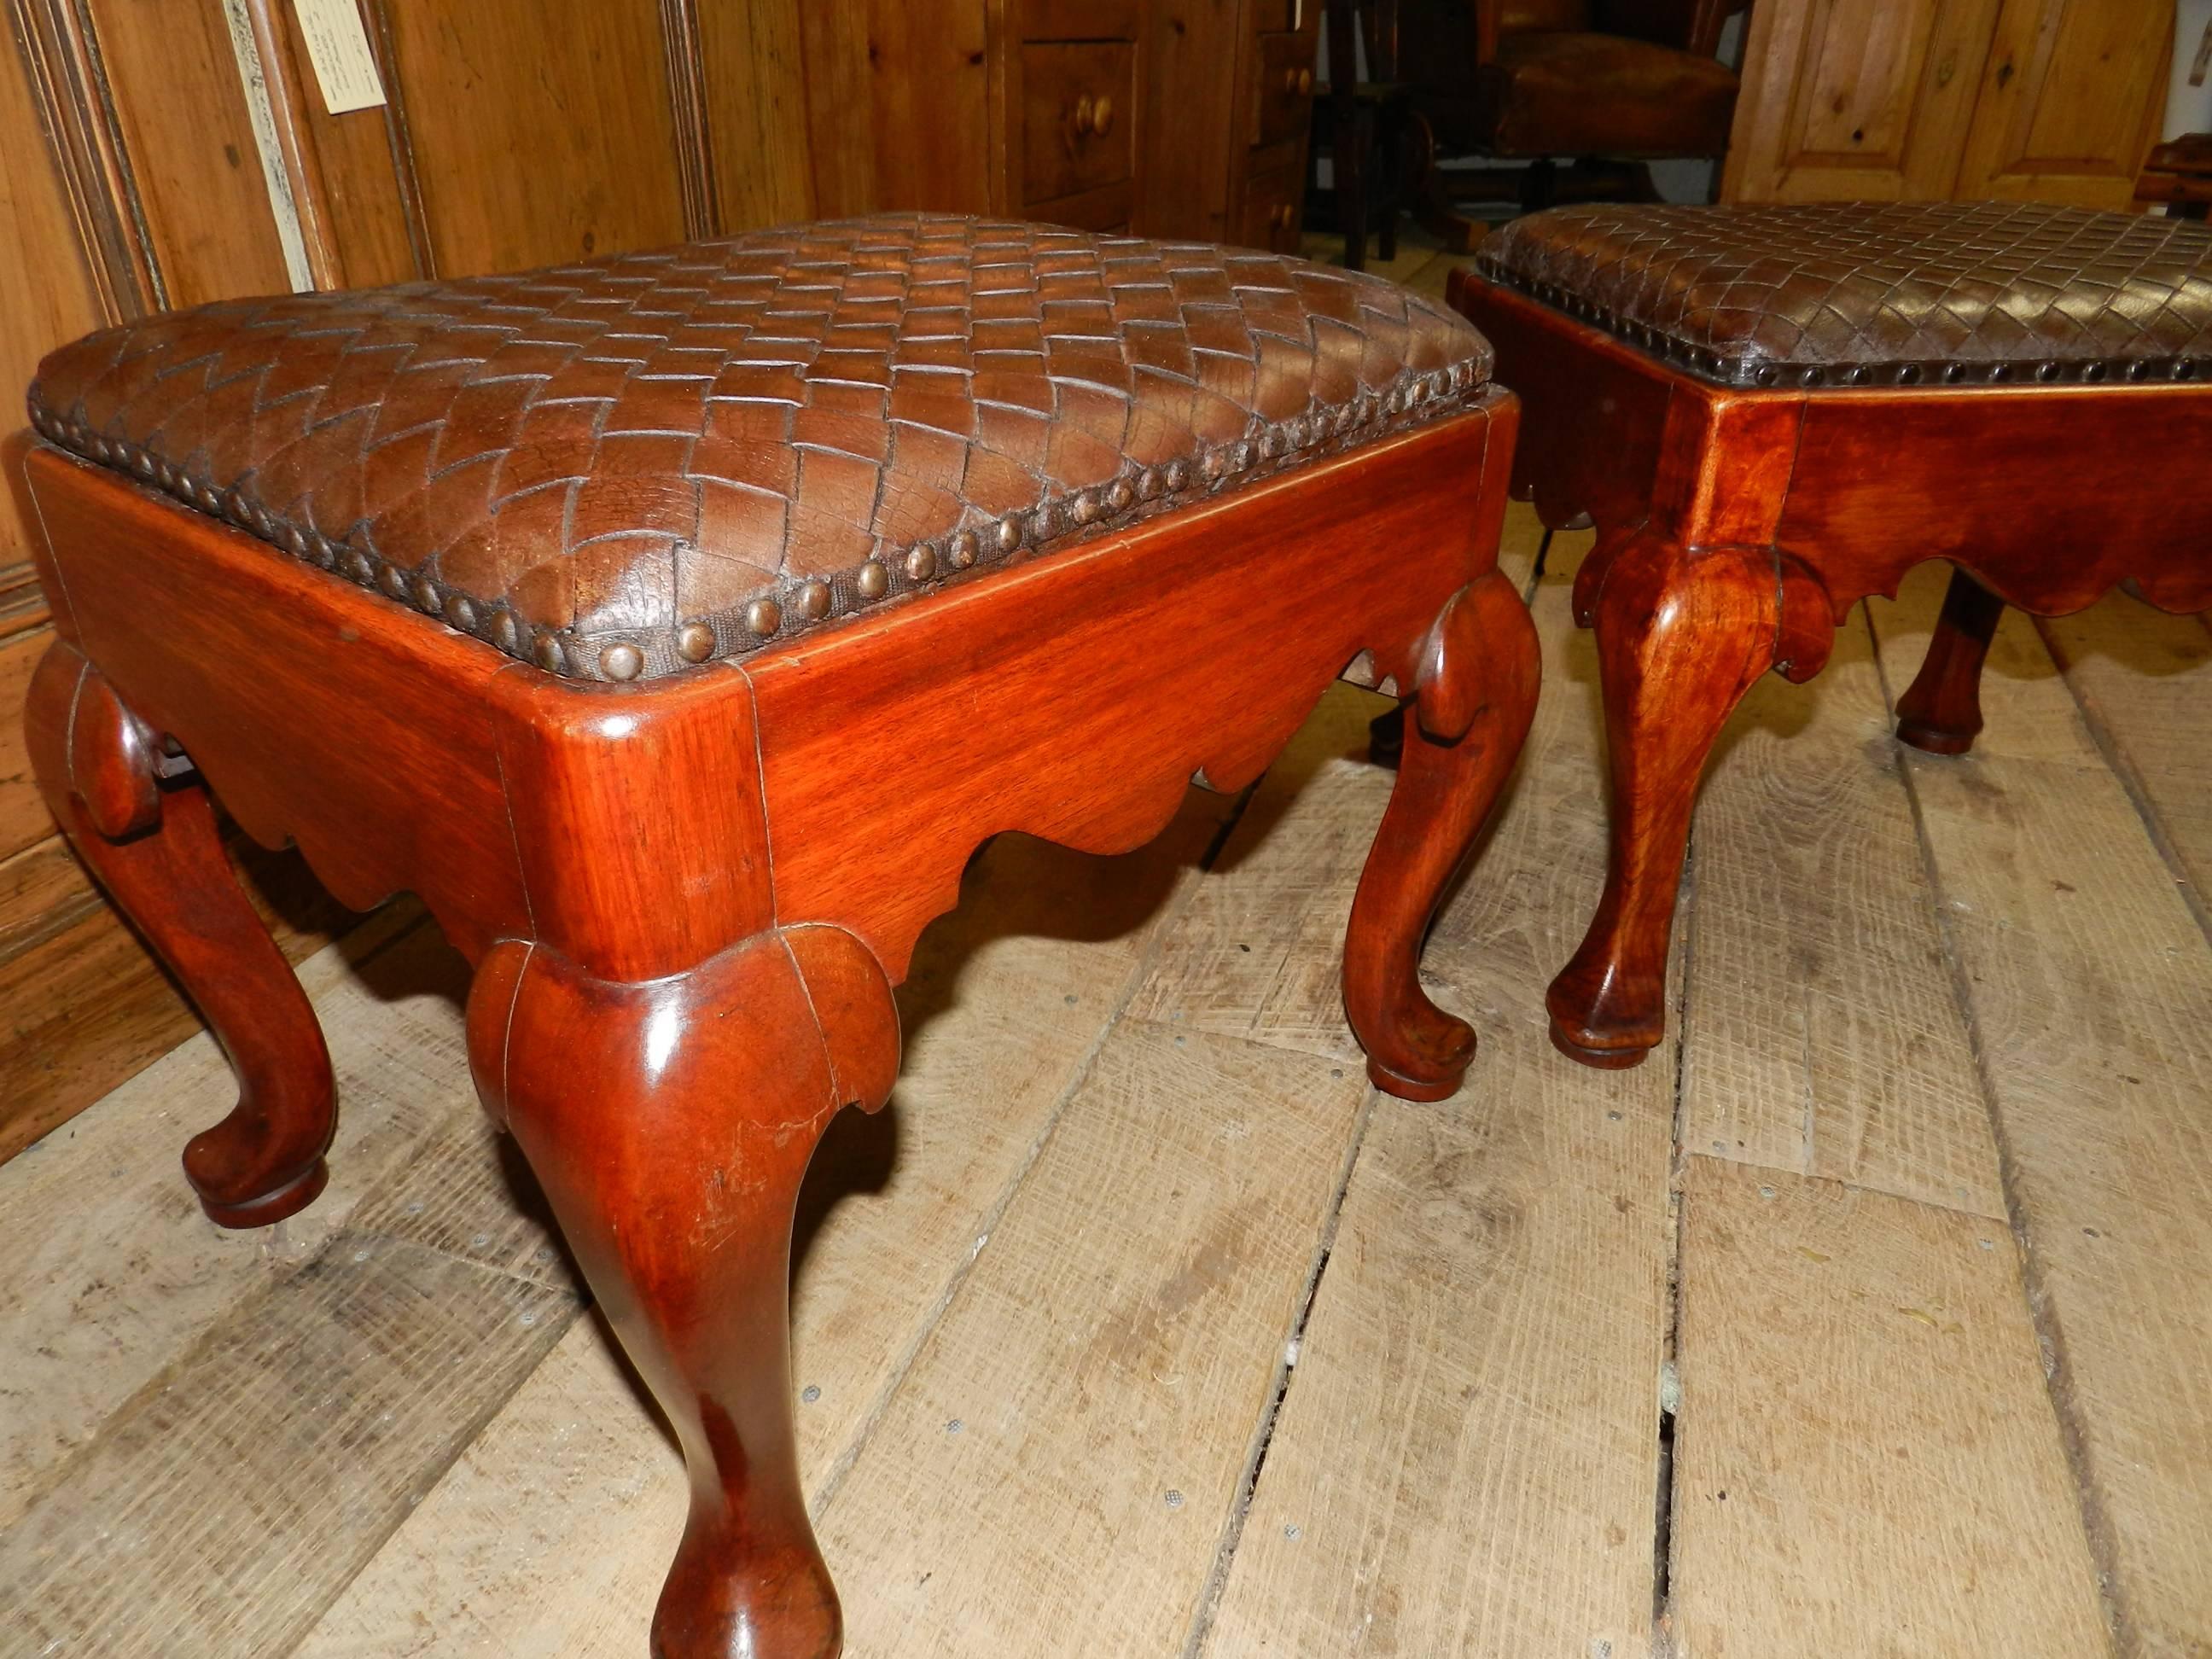 Pair of mahogany framed Chippendale style stools with woven leather seats.